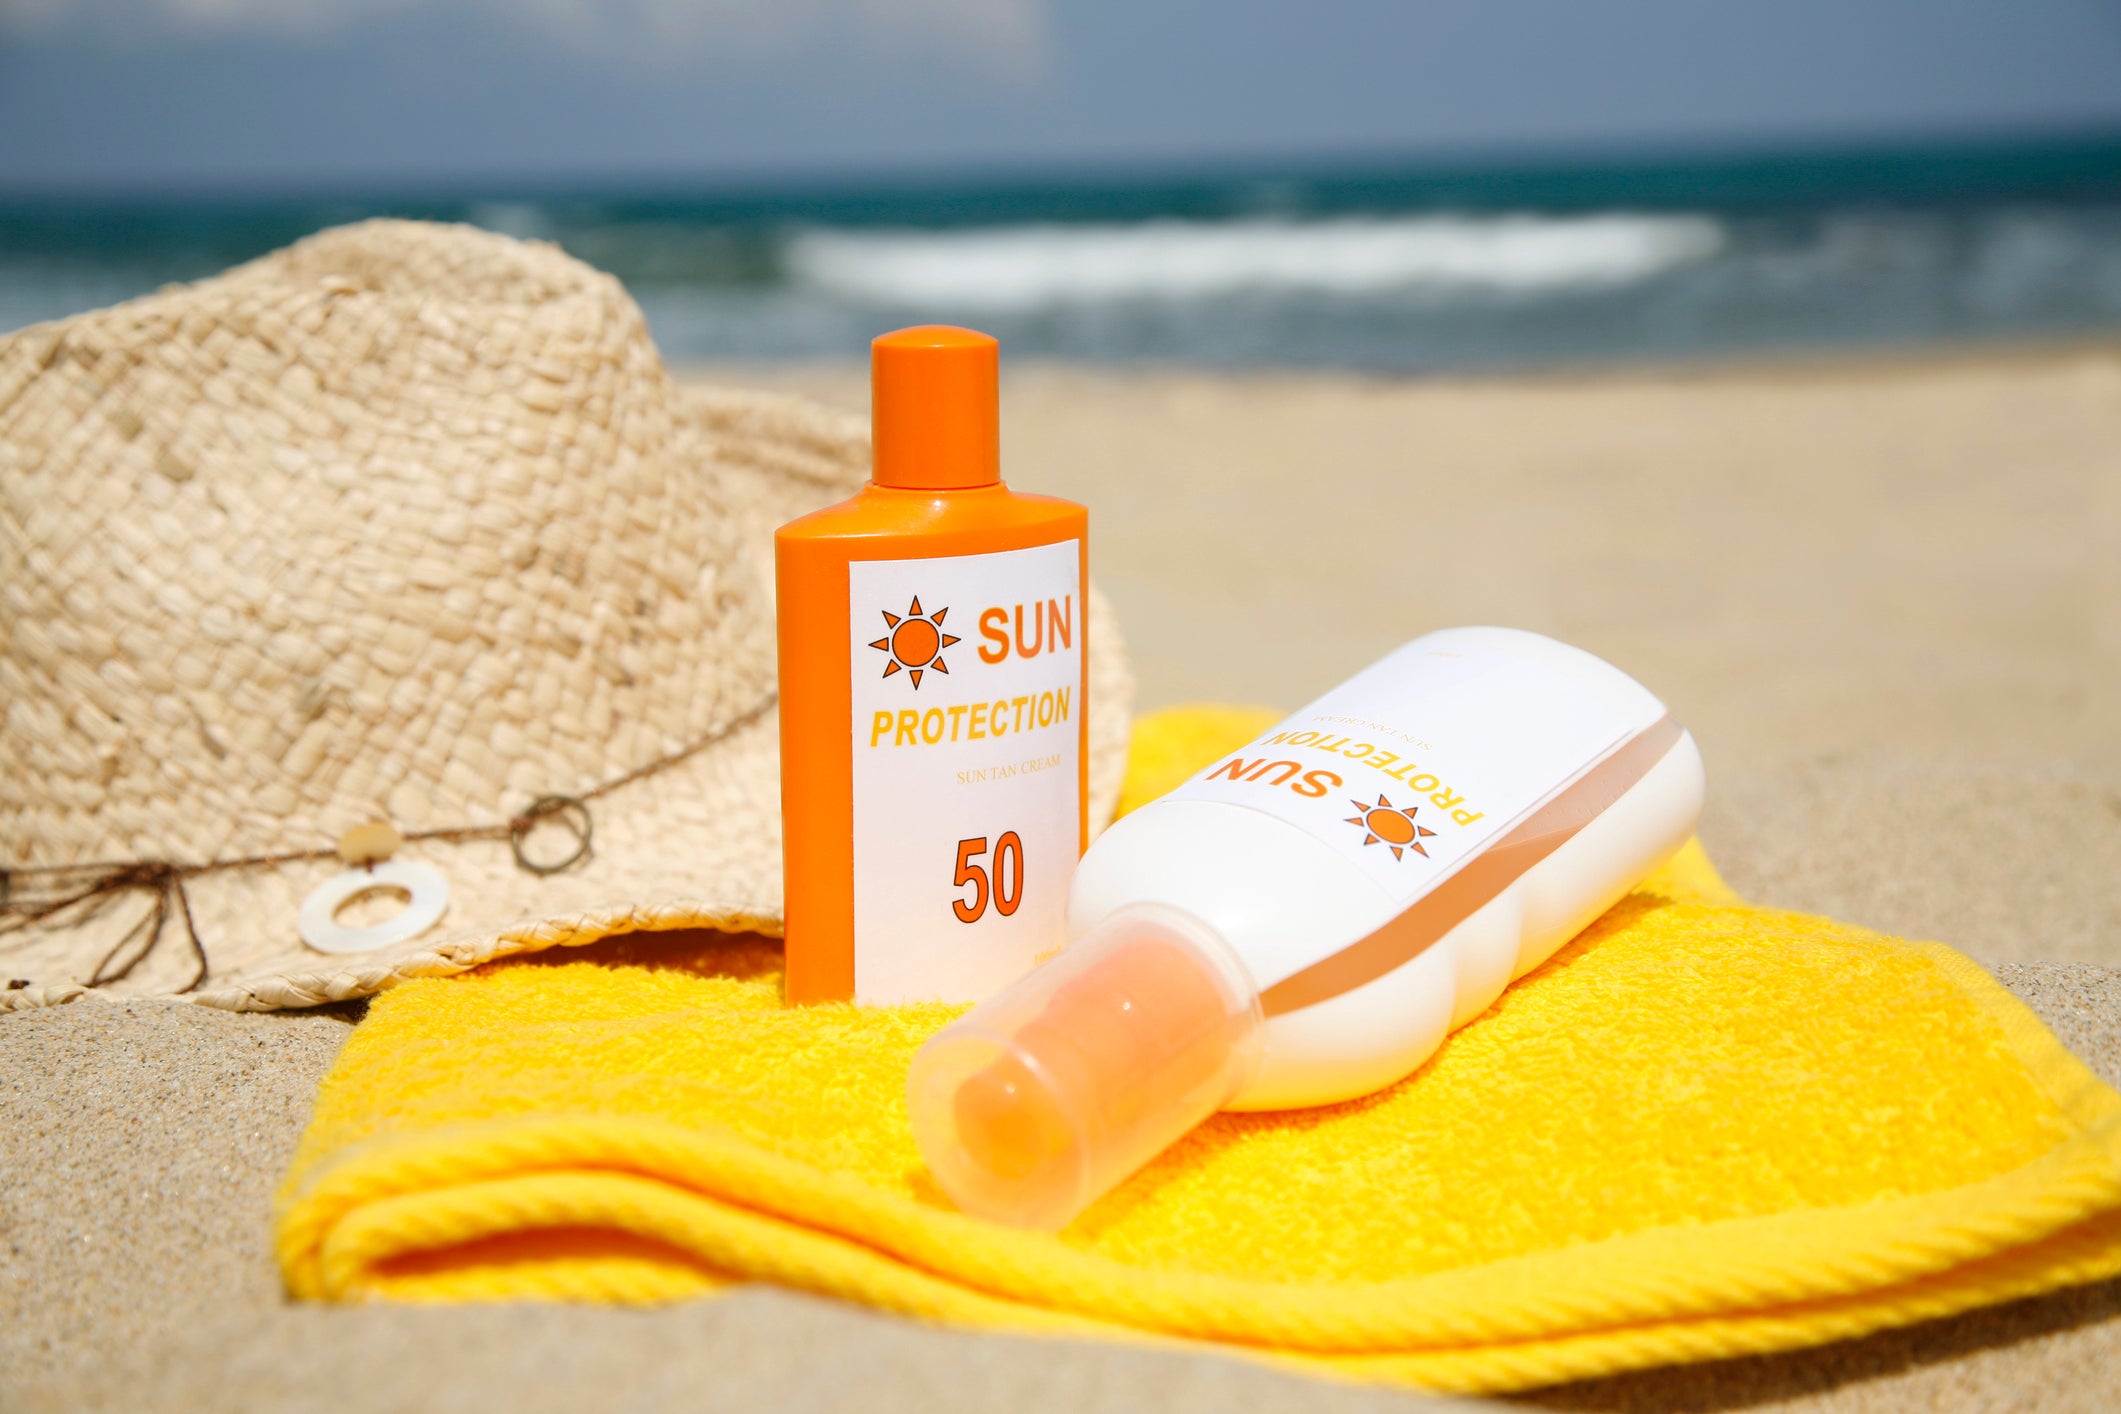 NHS recommends using suncream with minimum SPF 30